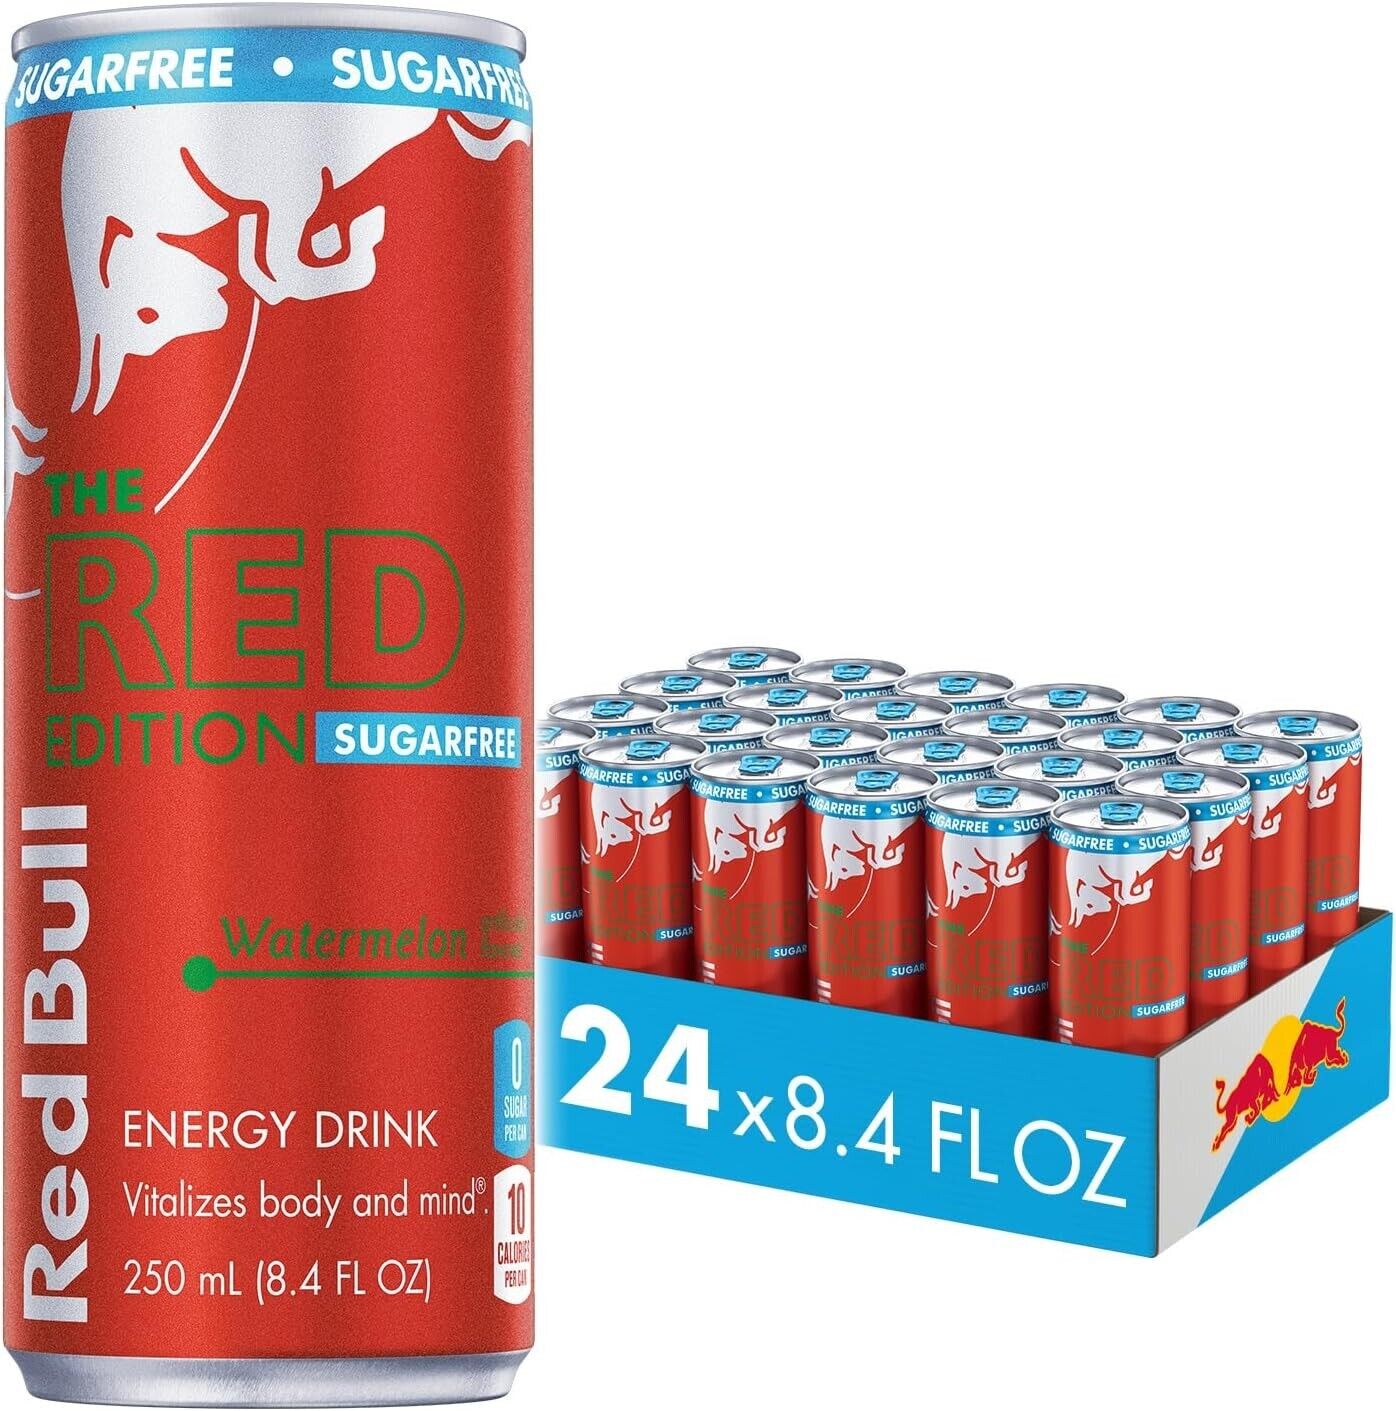 Red Bull Red Edition Sugar Free Energy Drink, Watermelon, 8oz Pack of 24